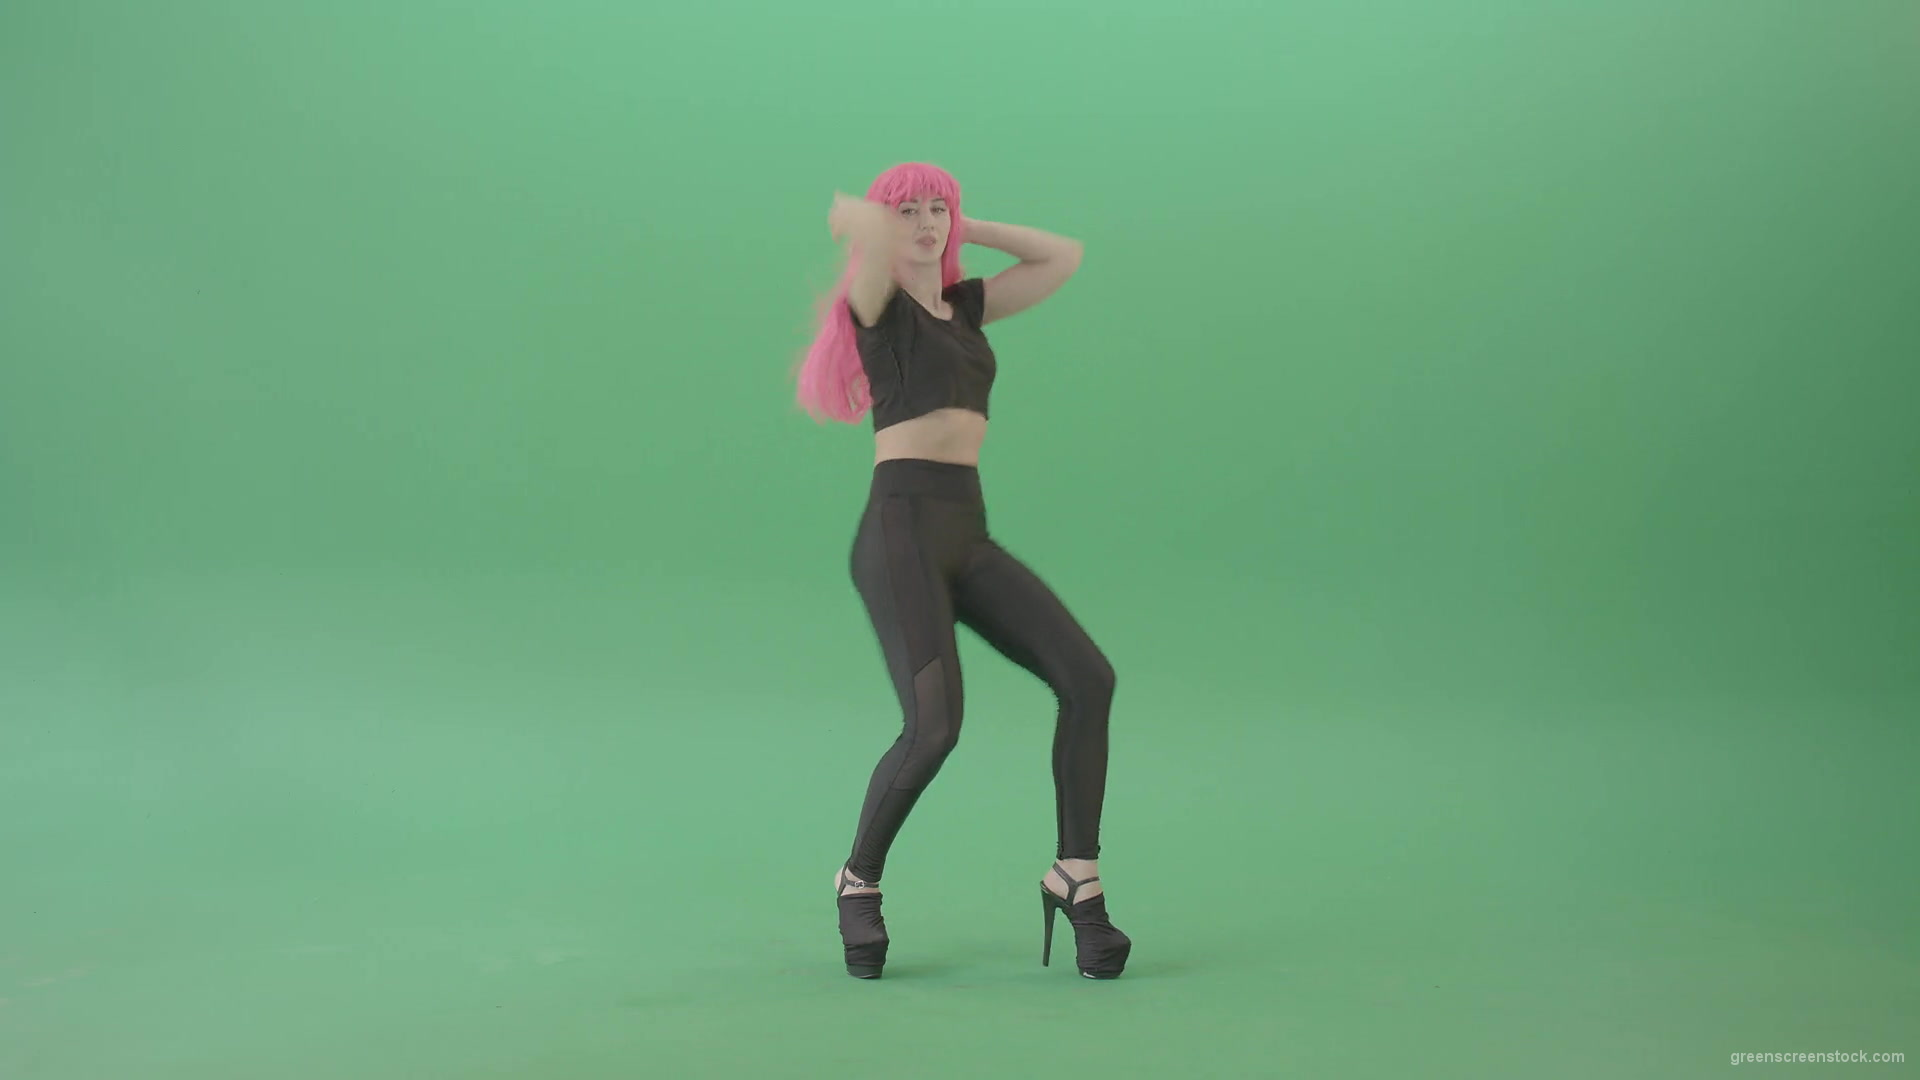 Pink-hair-EMO-sexy-girl-on-green-screen-posing-and-dancing-4K-Video-Footage-1920_004 Green Screen Stock